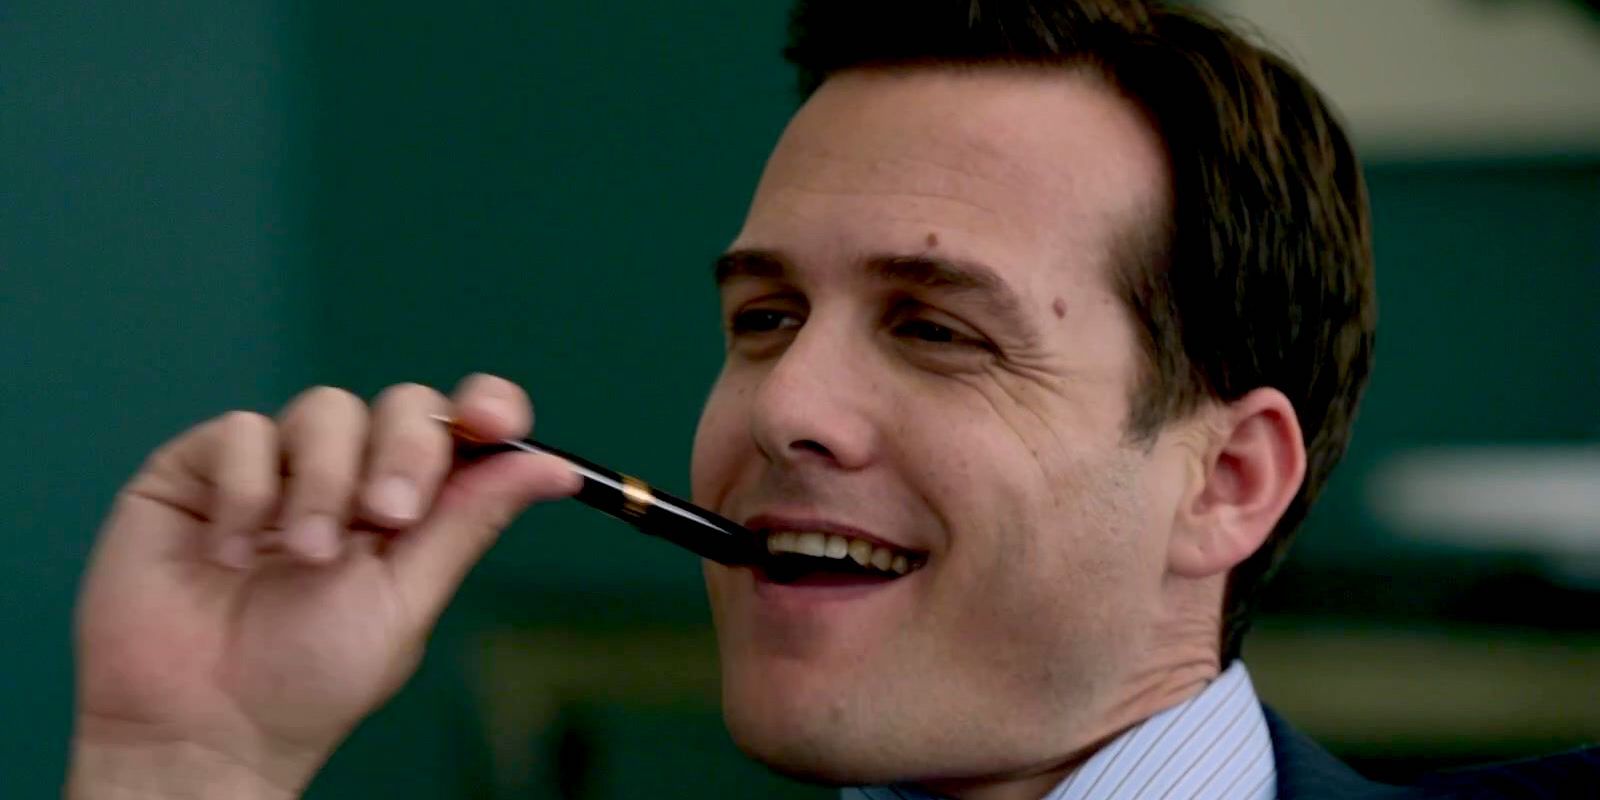 Lawyer Smiling with a Pen in His Mouth in Suits Season 1